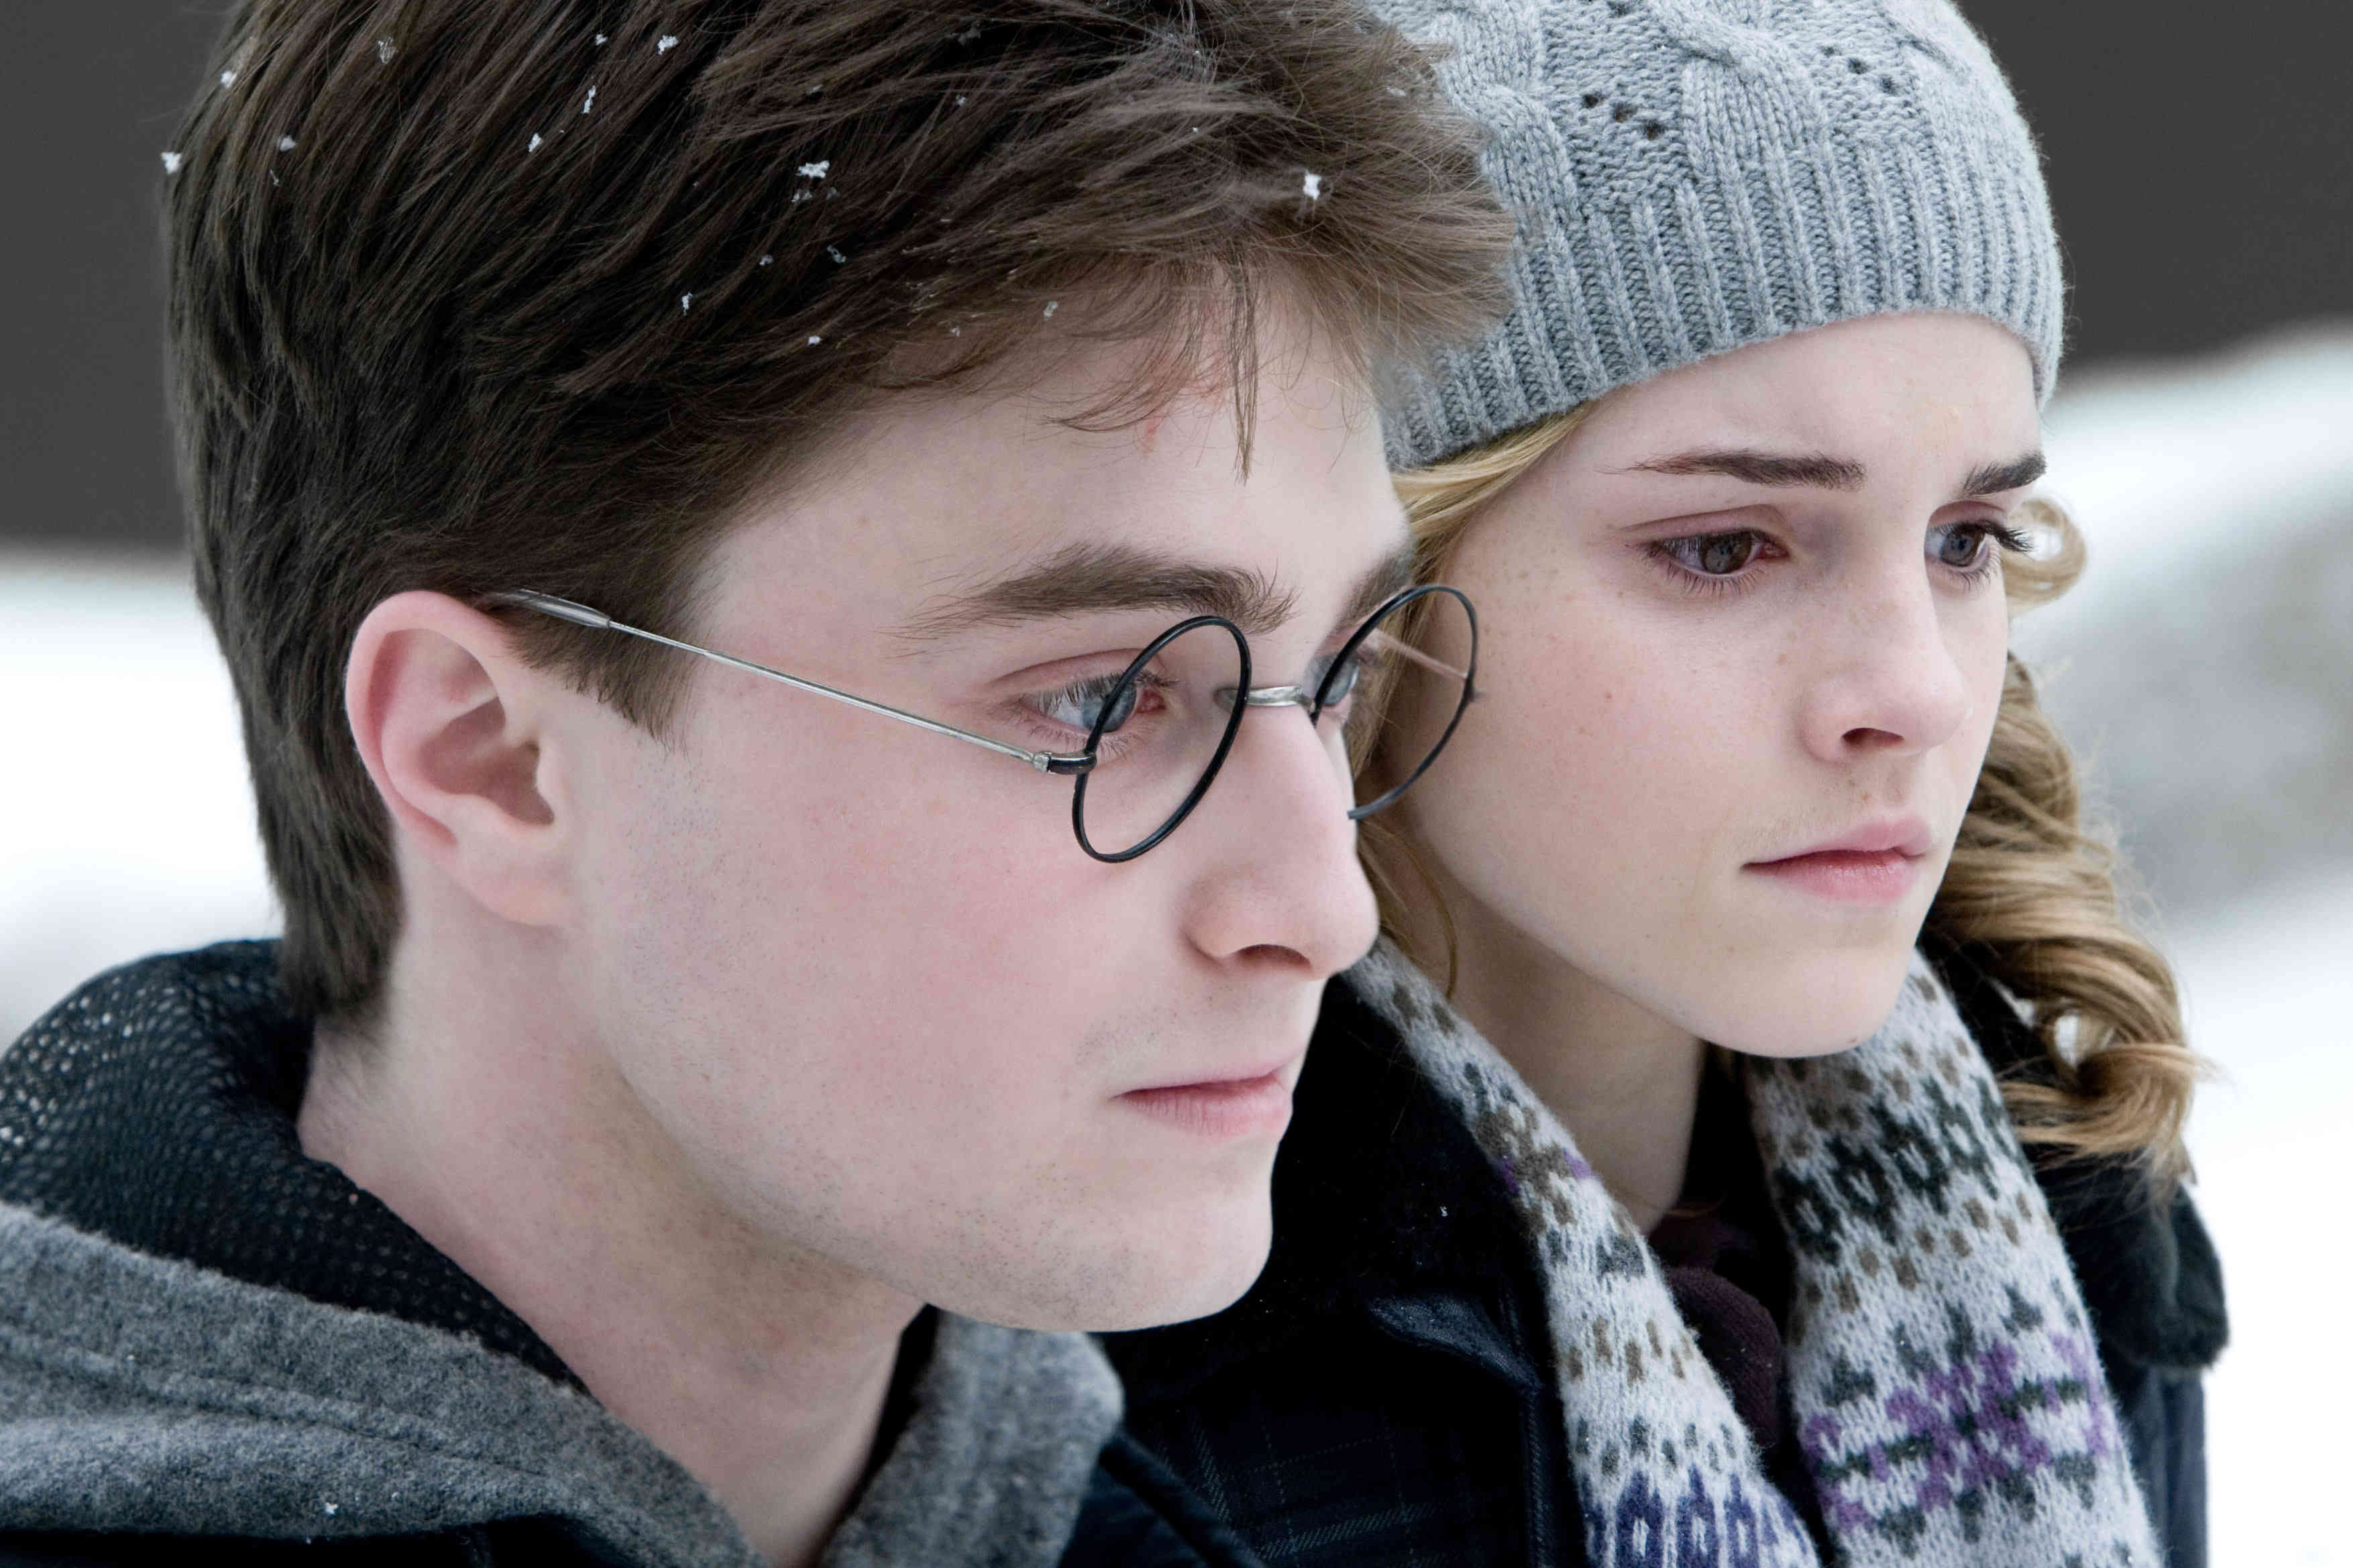 Daniel Radcliffe stars as Harry Potter and Emma Watson stars as Hermione Granger in Warner Bros Pictures' Harry Potter and the Half-Blood Prince (2009)